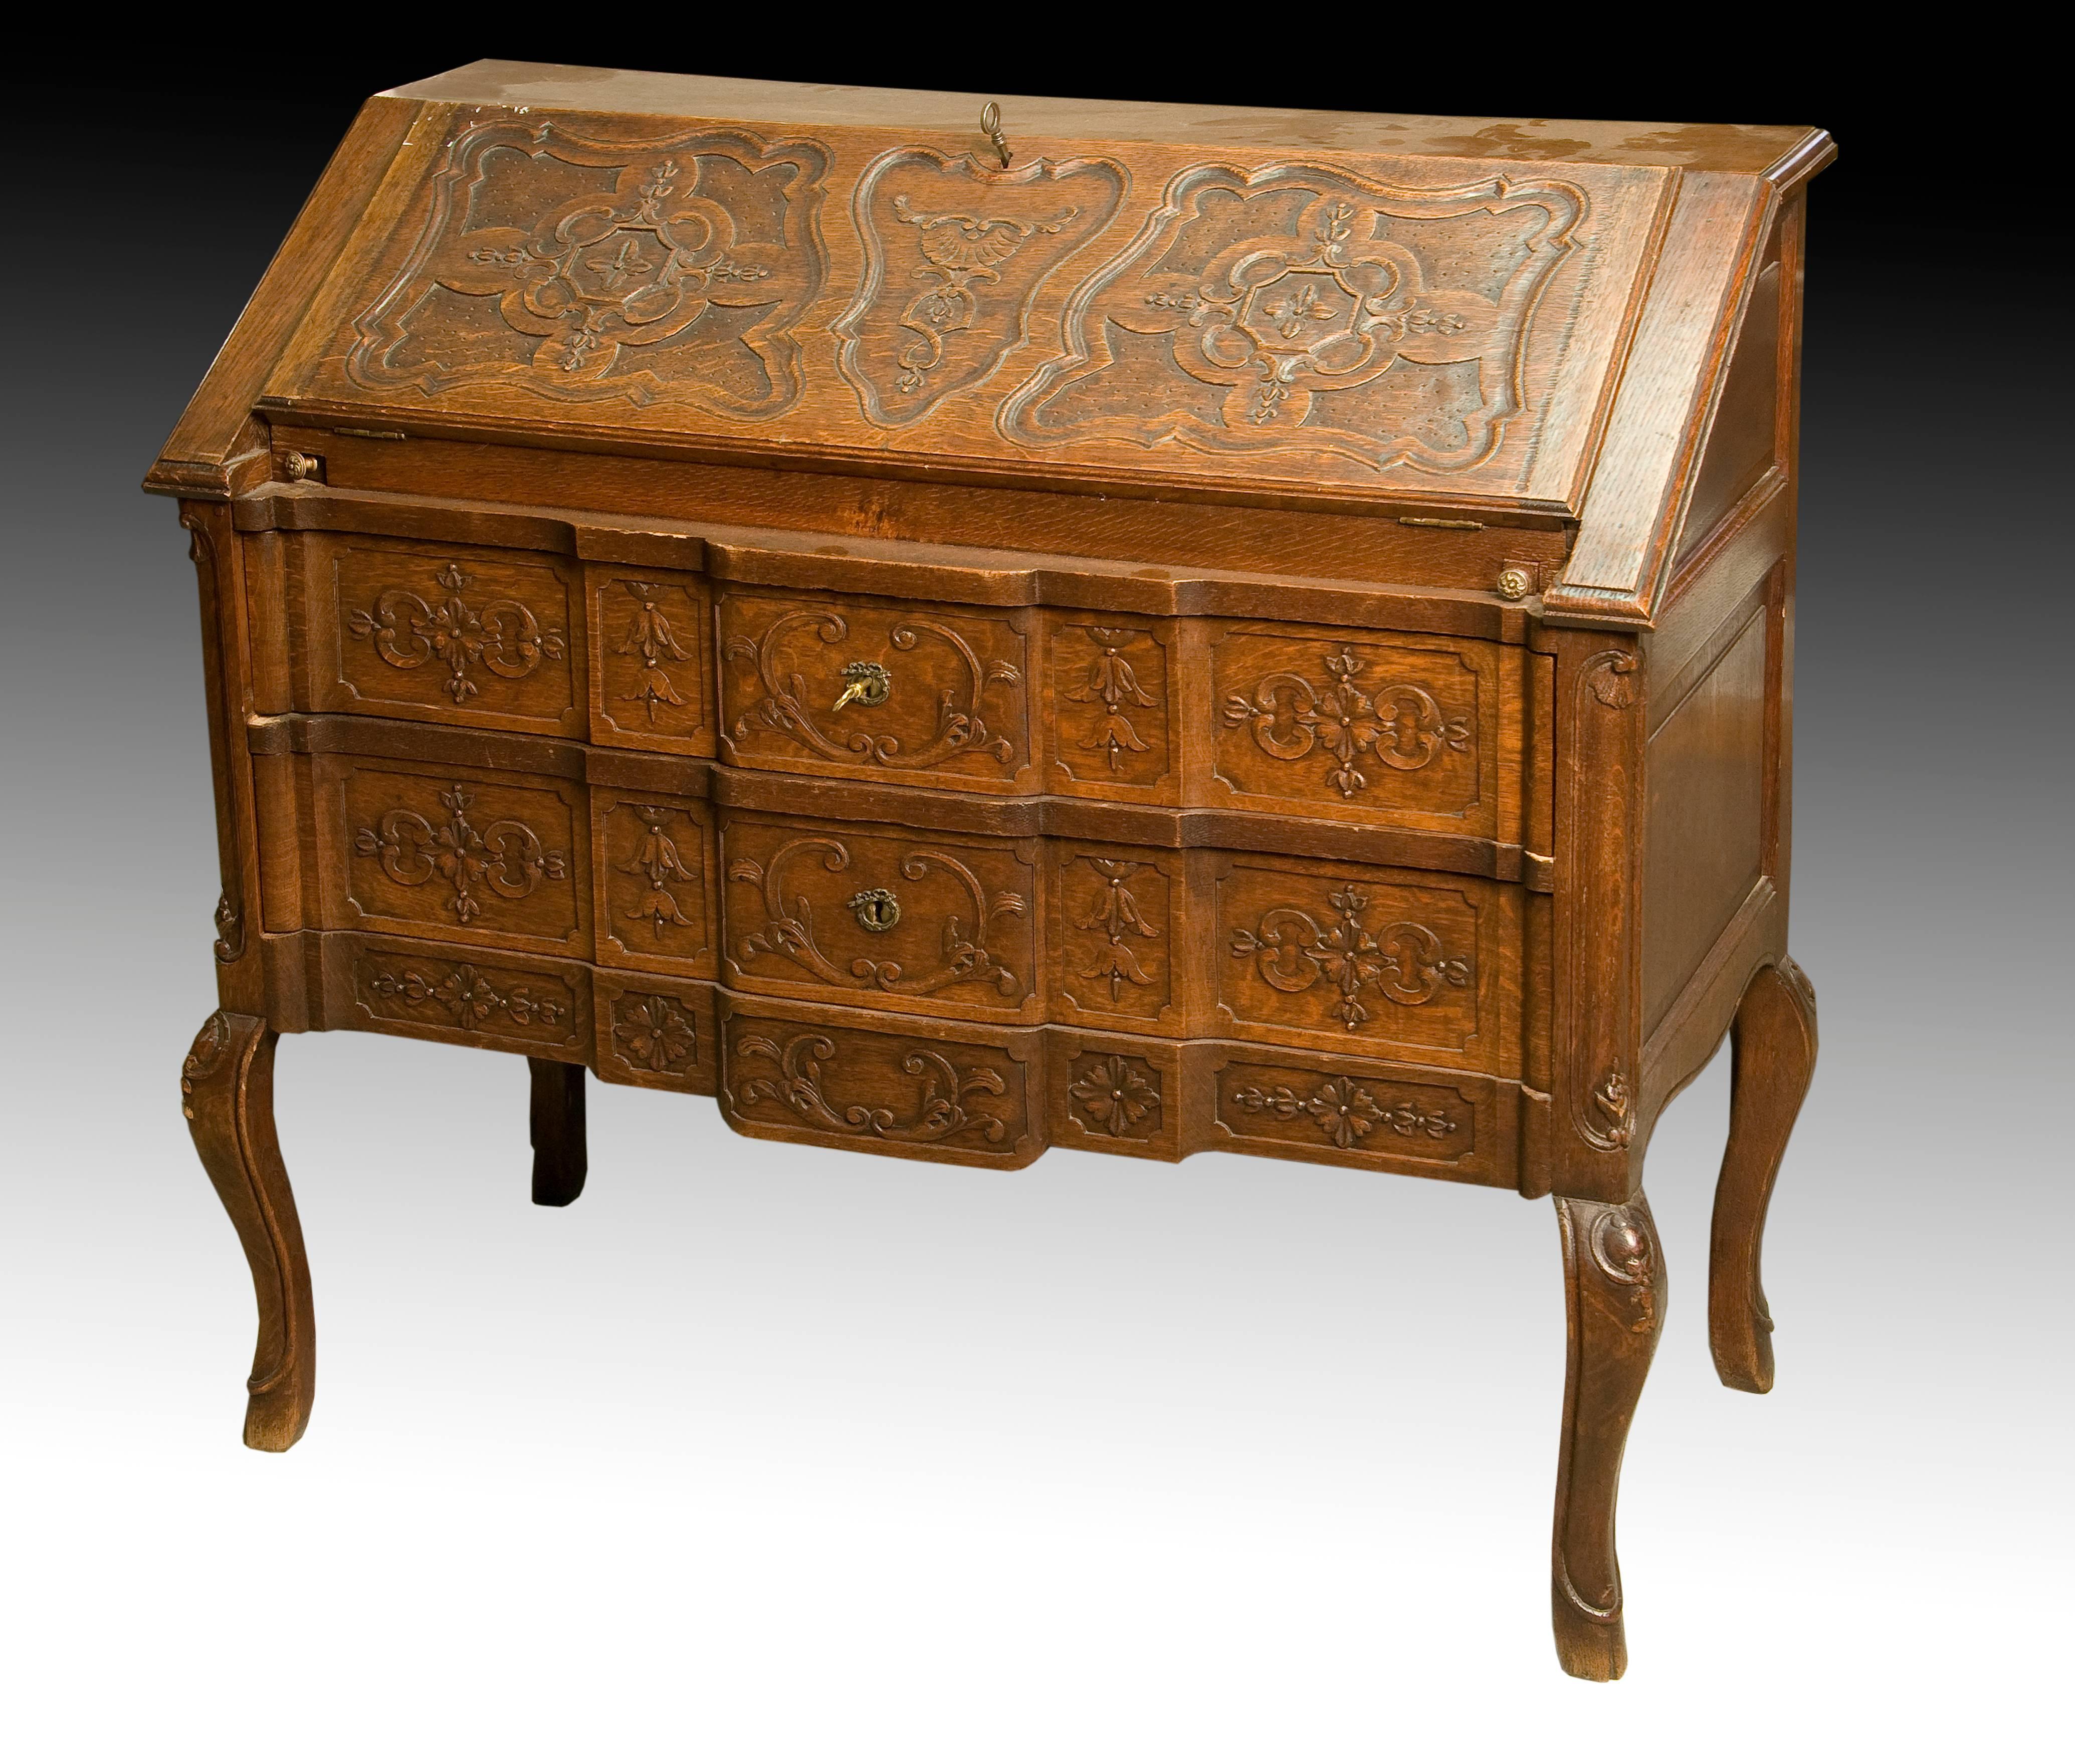 Desk with three drawers to the front that has slightly curved legs and a carving centered on the front of the furniture based on simple plant elements and moldings with curves and counter curves, inspired by the Rococo. This style also influences